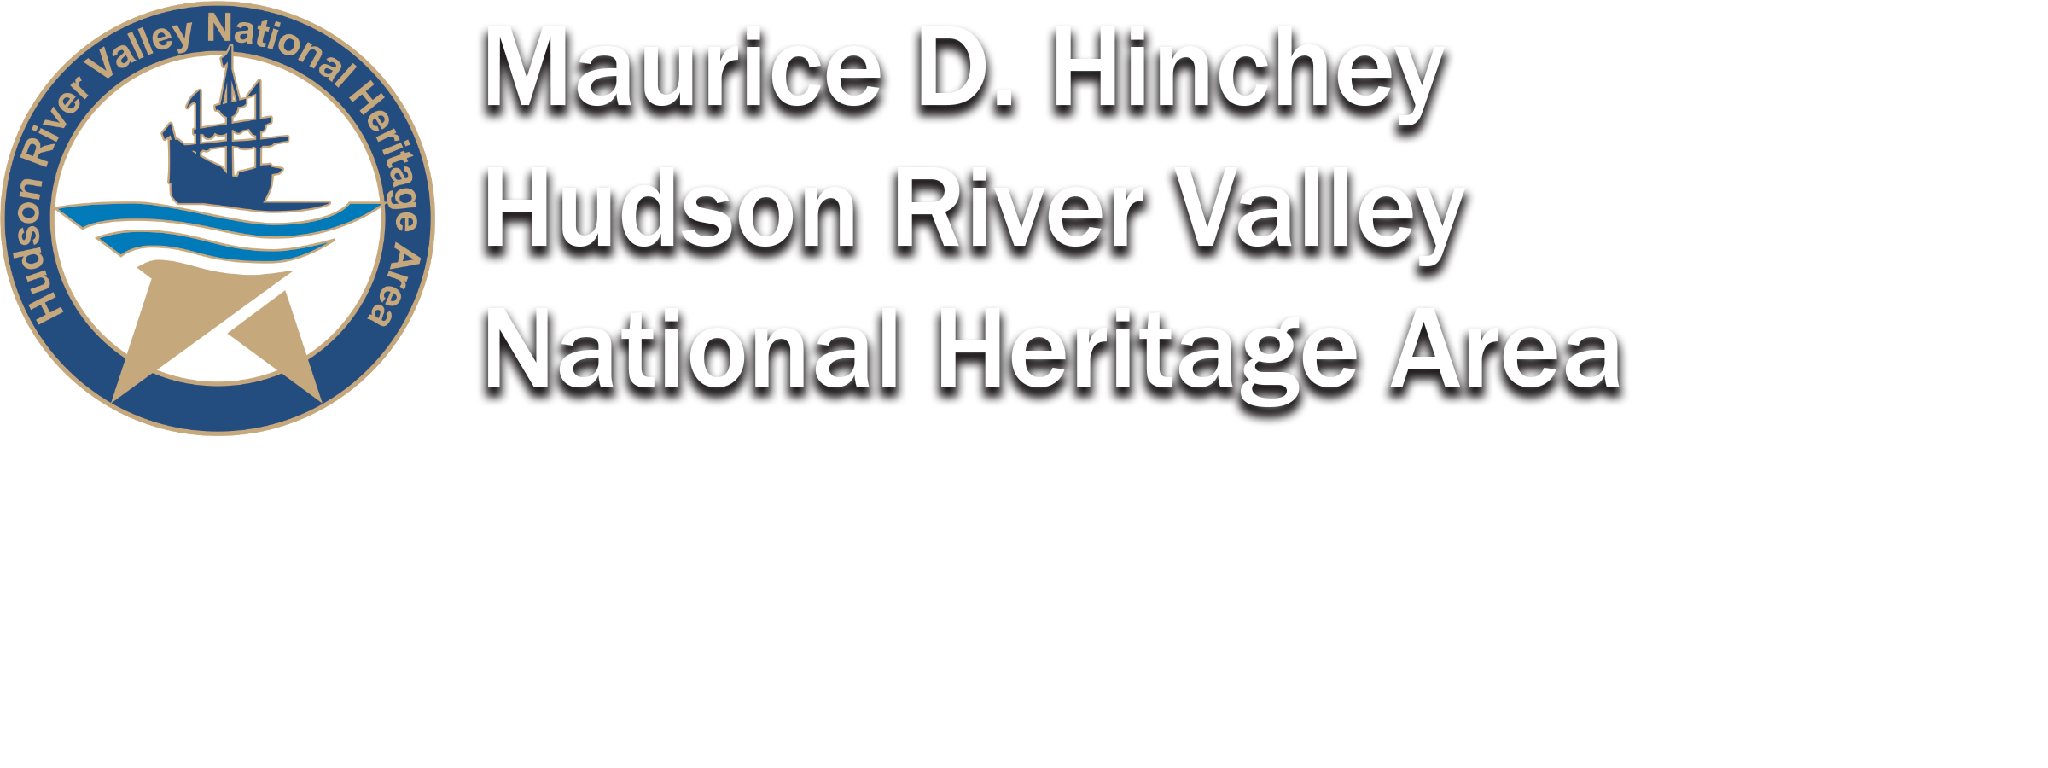 Logo of Maurice D. Hinchey Hudson River Valley National Heritage Area